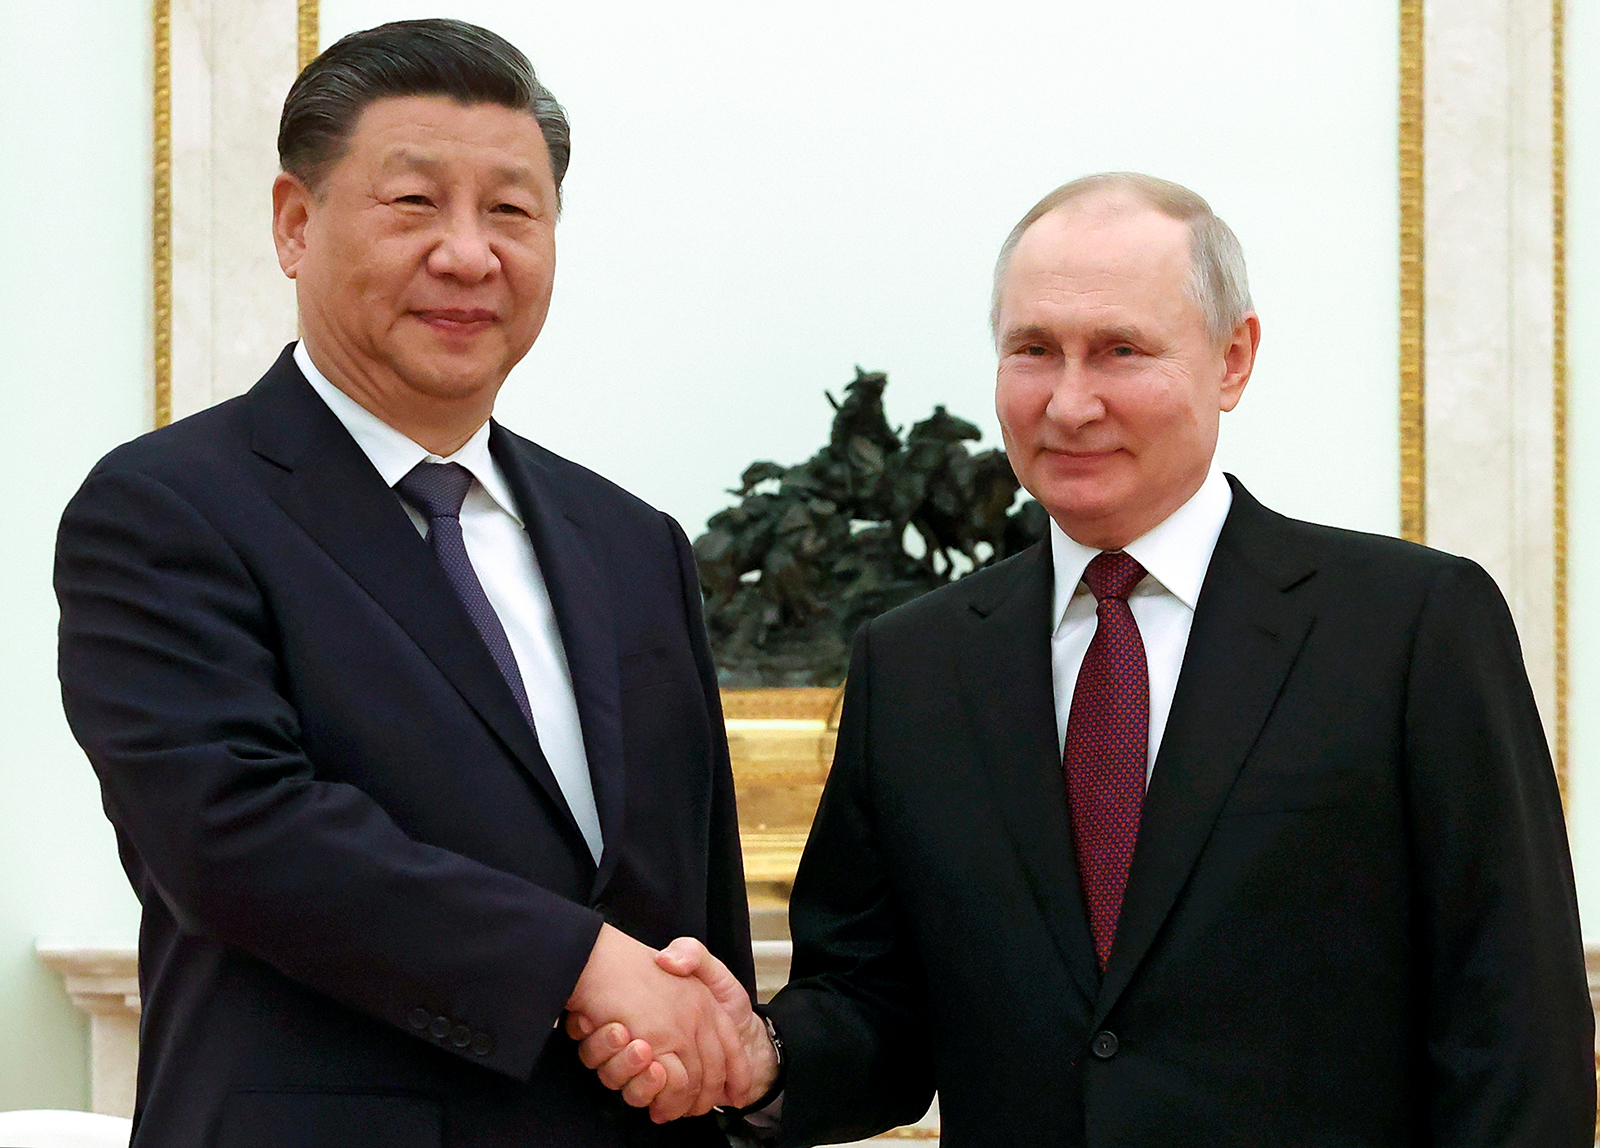 Xi Jinping and Vladimir Putin pose for a photo during their meeting at the Kremlin on March 20.